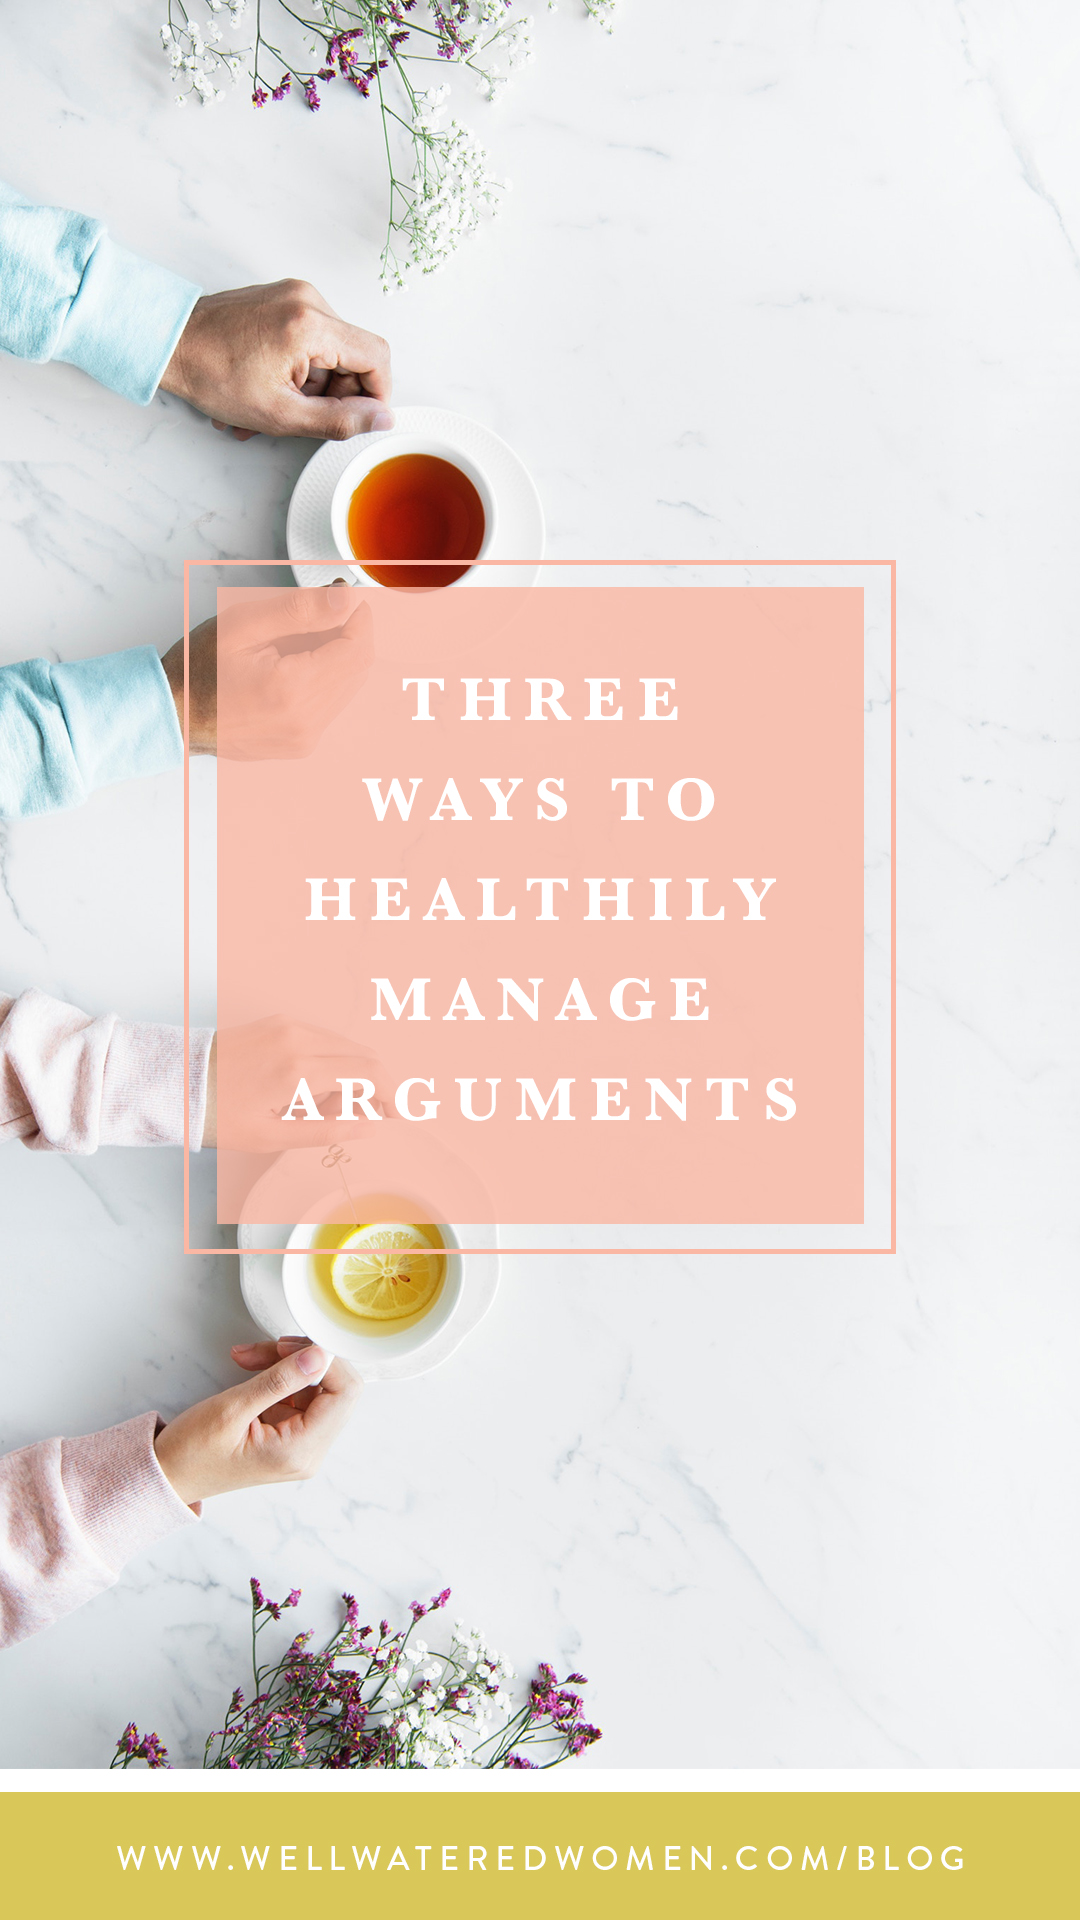 3 Ways to Argue "Well" with Your Spouse. You can manage arguements well and have a healthy marriage! Arguments and disagreements will come. Emotions between spouses are healthy and good. It's the managing of our negative emotions that takes effort and intentionality. But don't ever lose sight of the fact that it's worth every bit of energy we put into it.